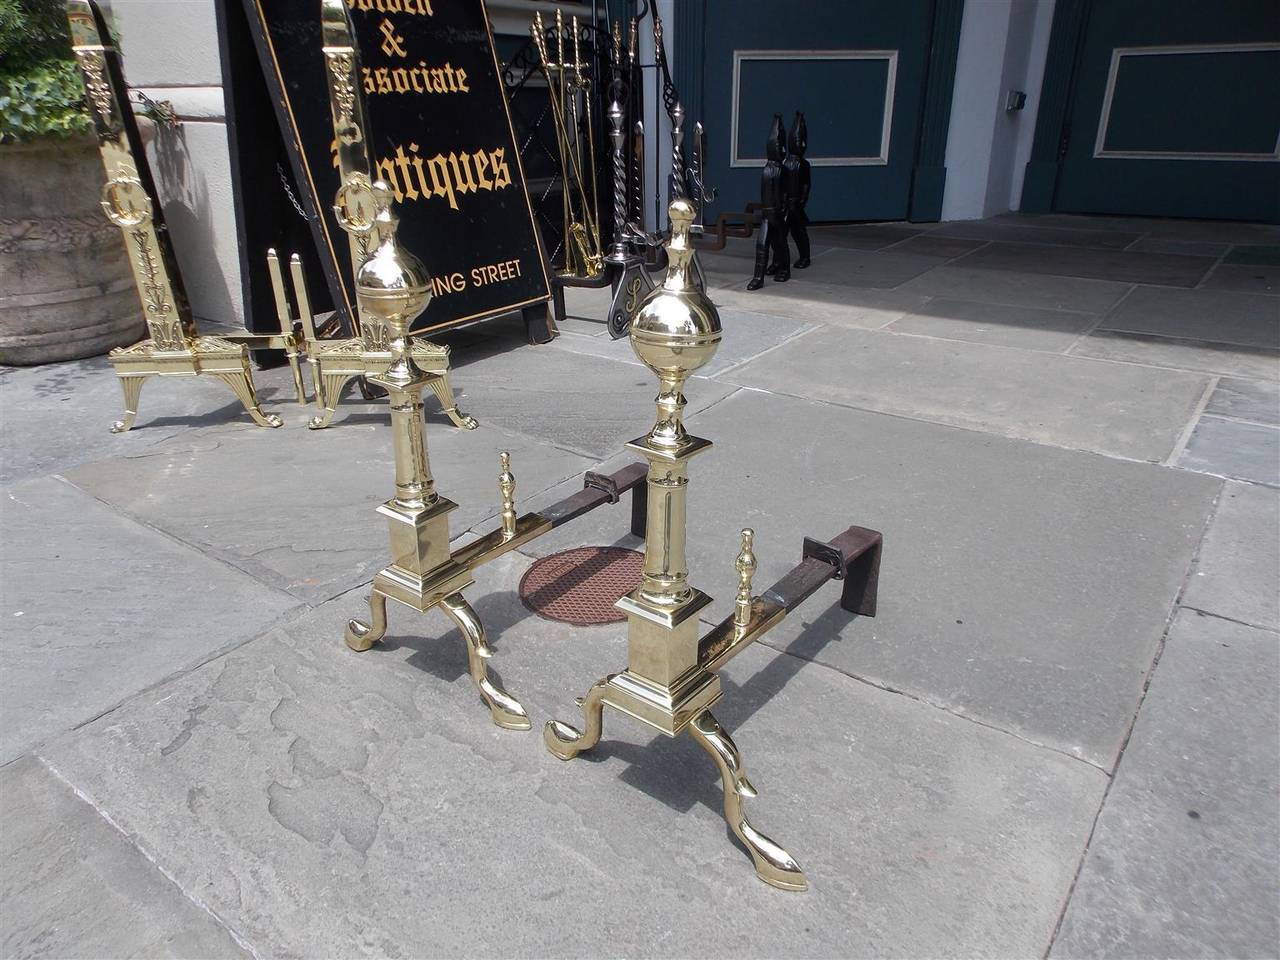 Pair of American brass ball top finial andirons with turned ringed centered columns, squared plinths, matching log stops and terminating on spur legs with slipper feet, Early 19th century, New York.